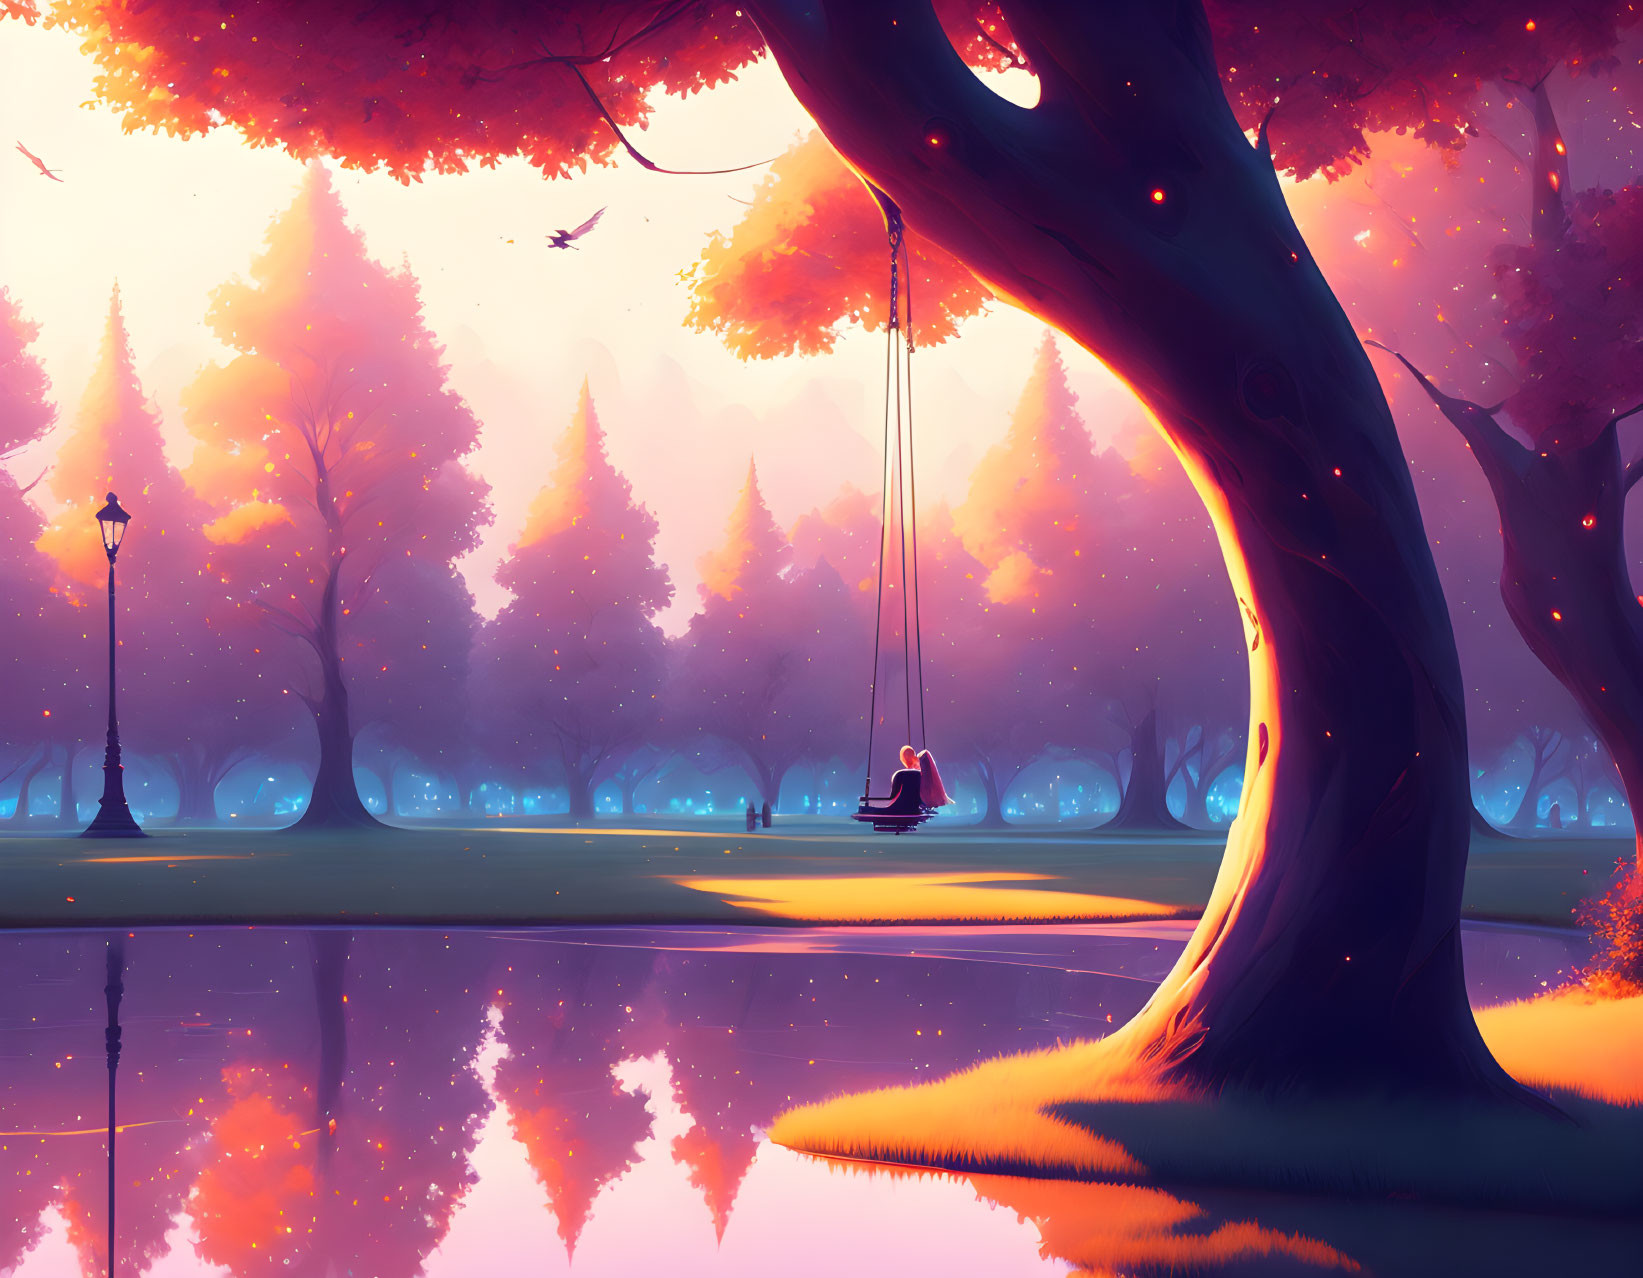 Person on swing in purple forest landscape with water reflections